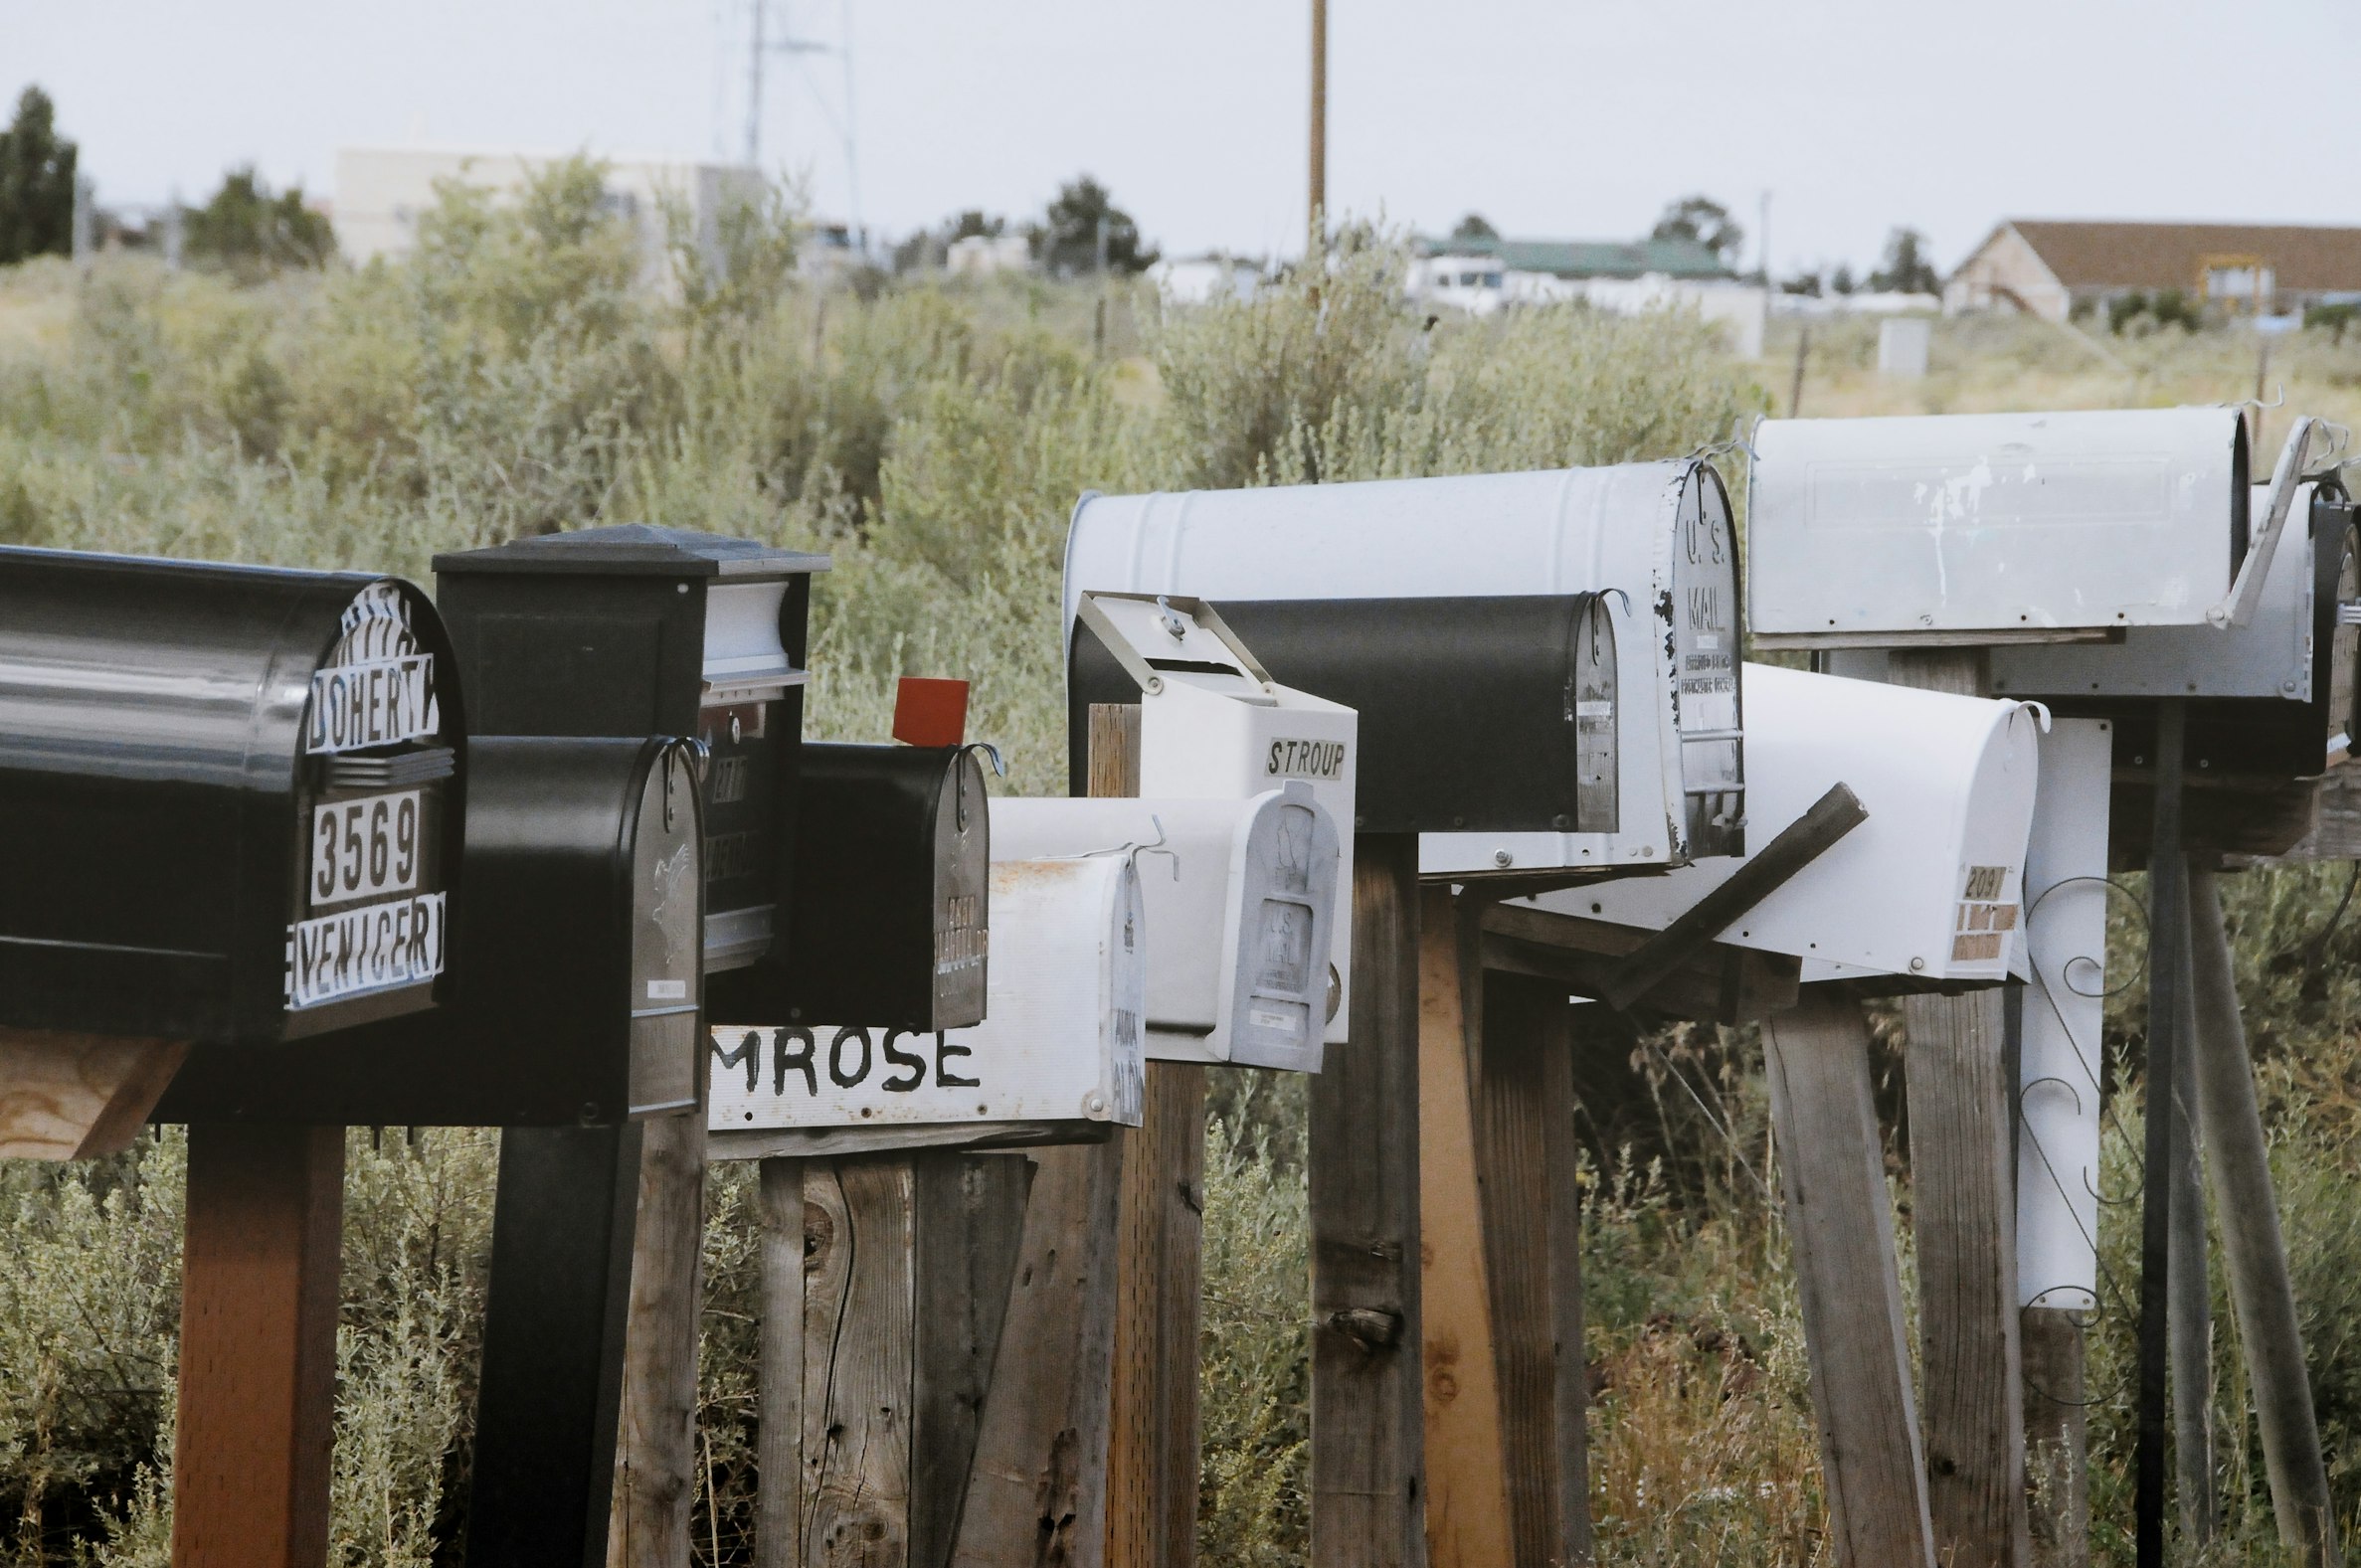 Unsplash image from Yannik Mika showing a row of mailboxes